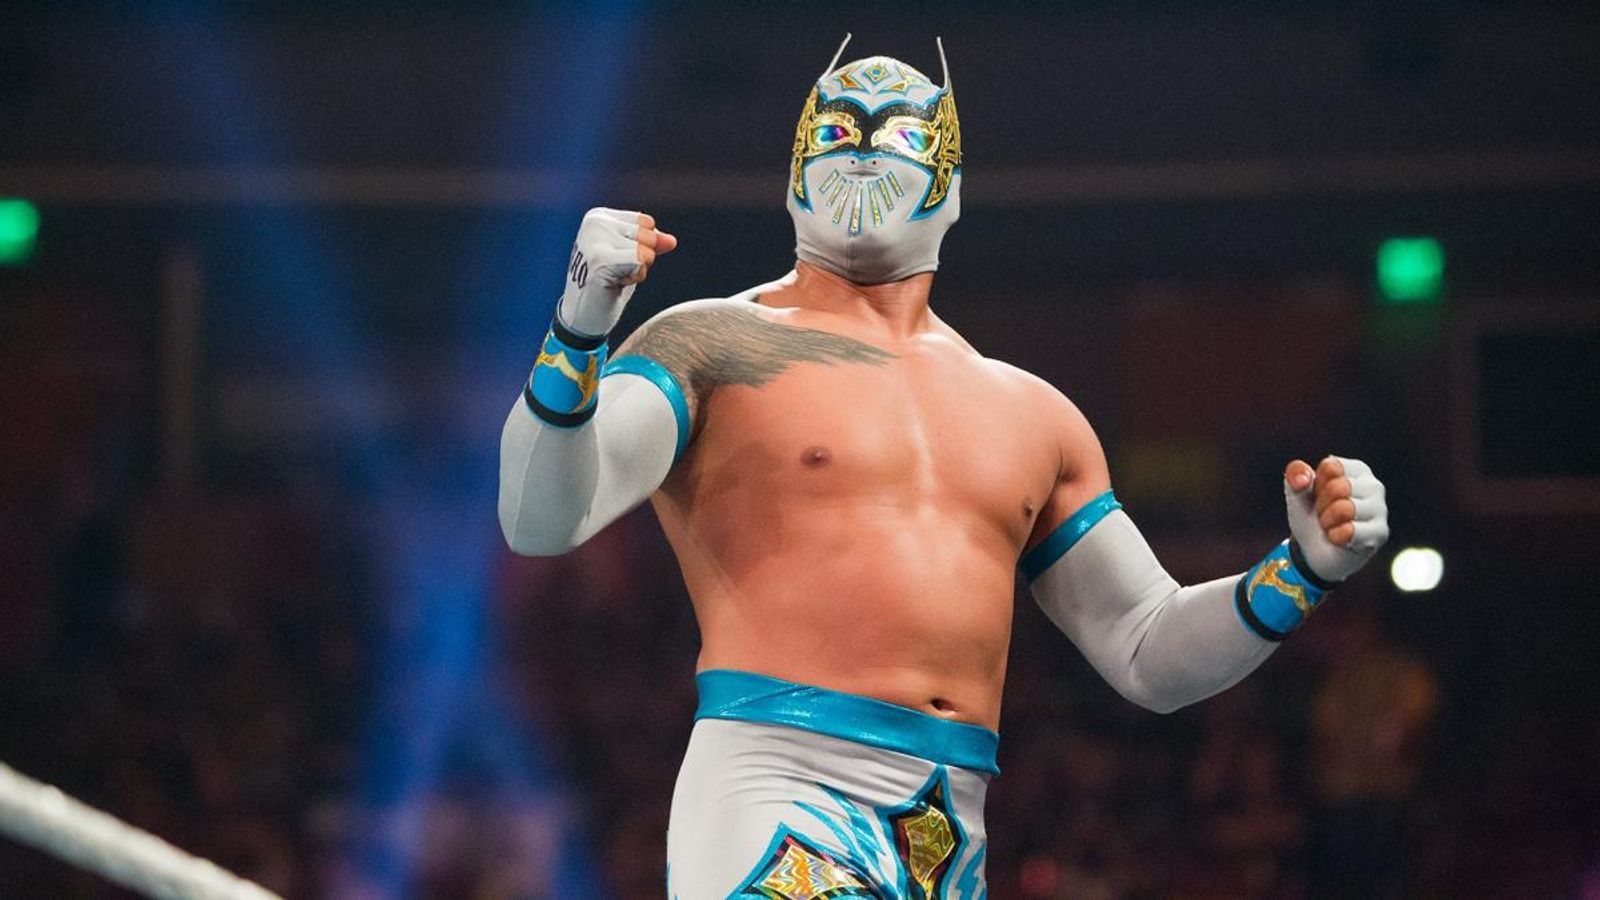 WWE Sin Cara has surgery to remove scar tissue on right knee WWE